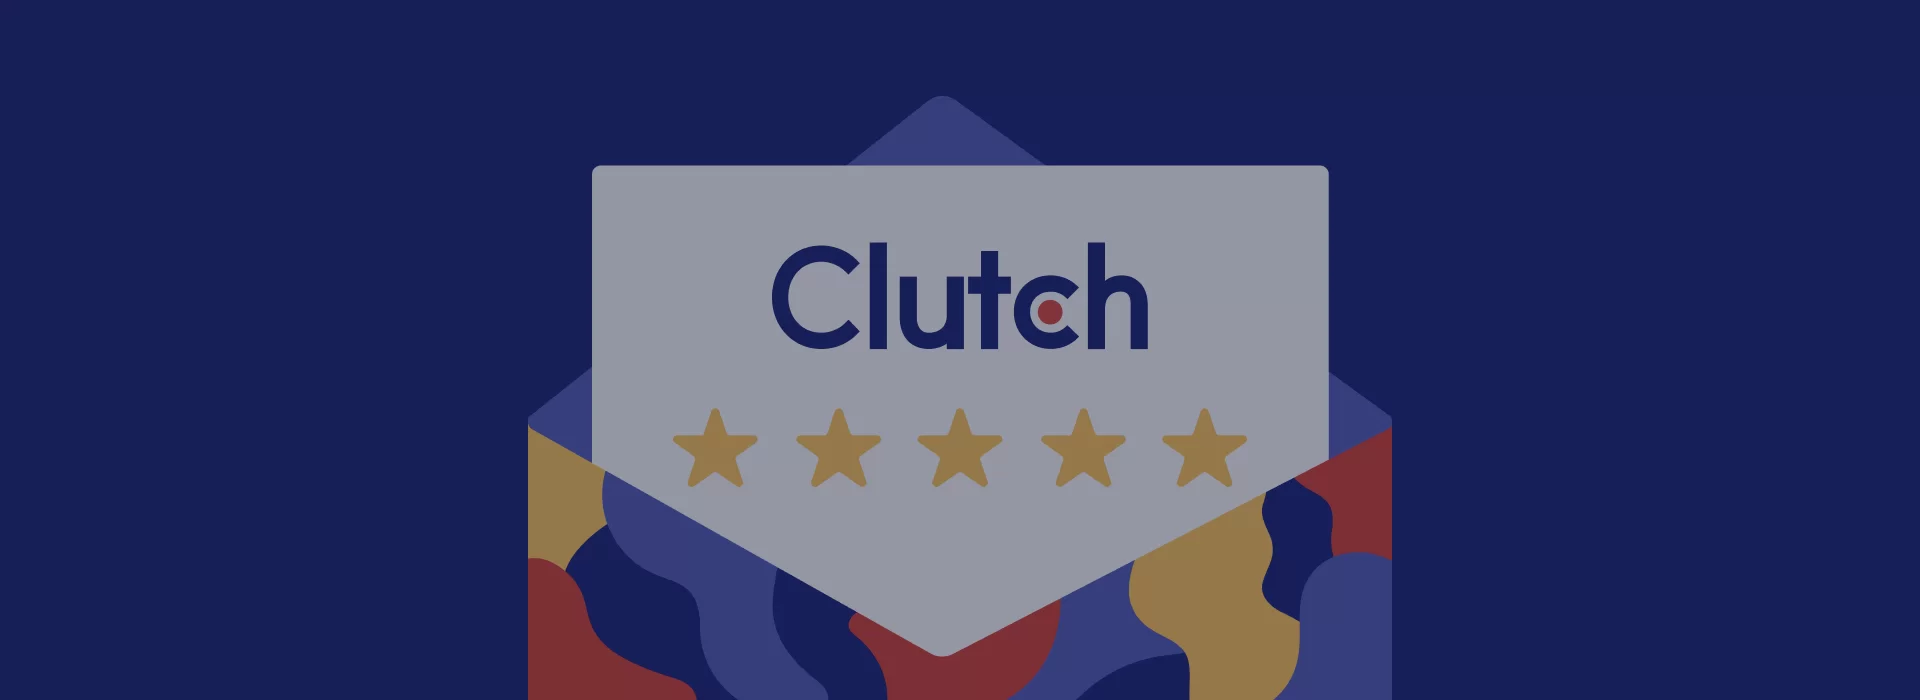 ADCI Solutions was featured in the Clutch press release